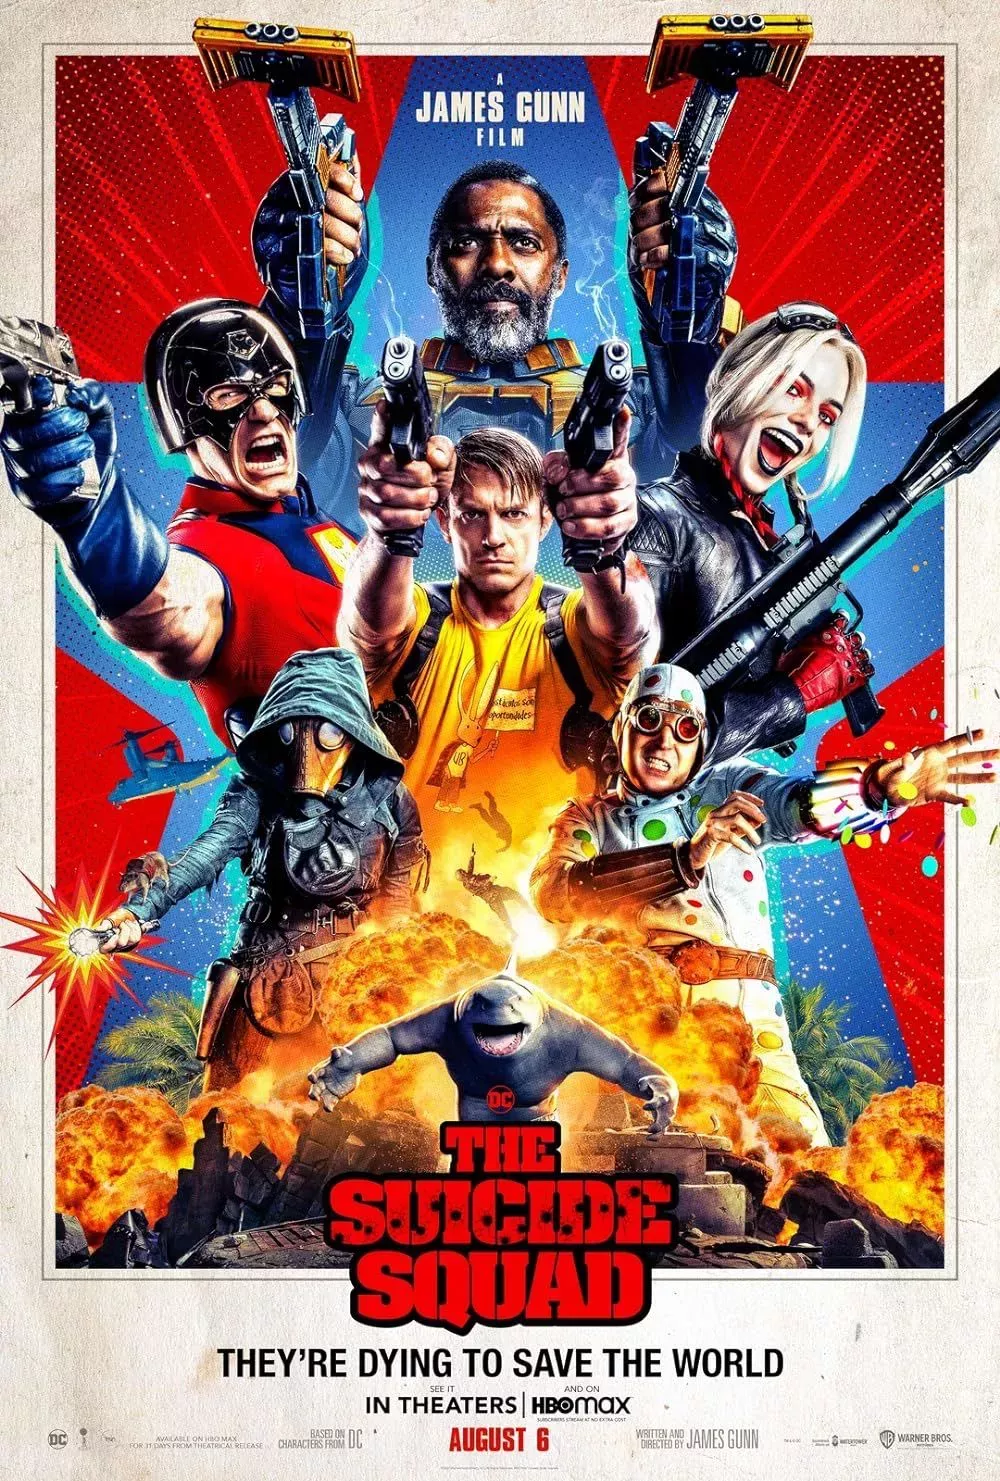 The cast of The Suicide Squad 2021 on the movie poster